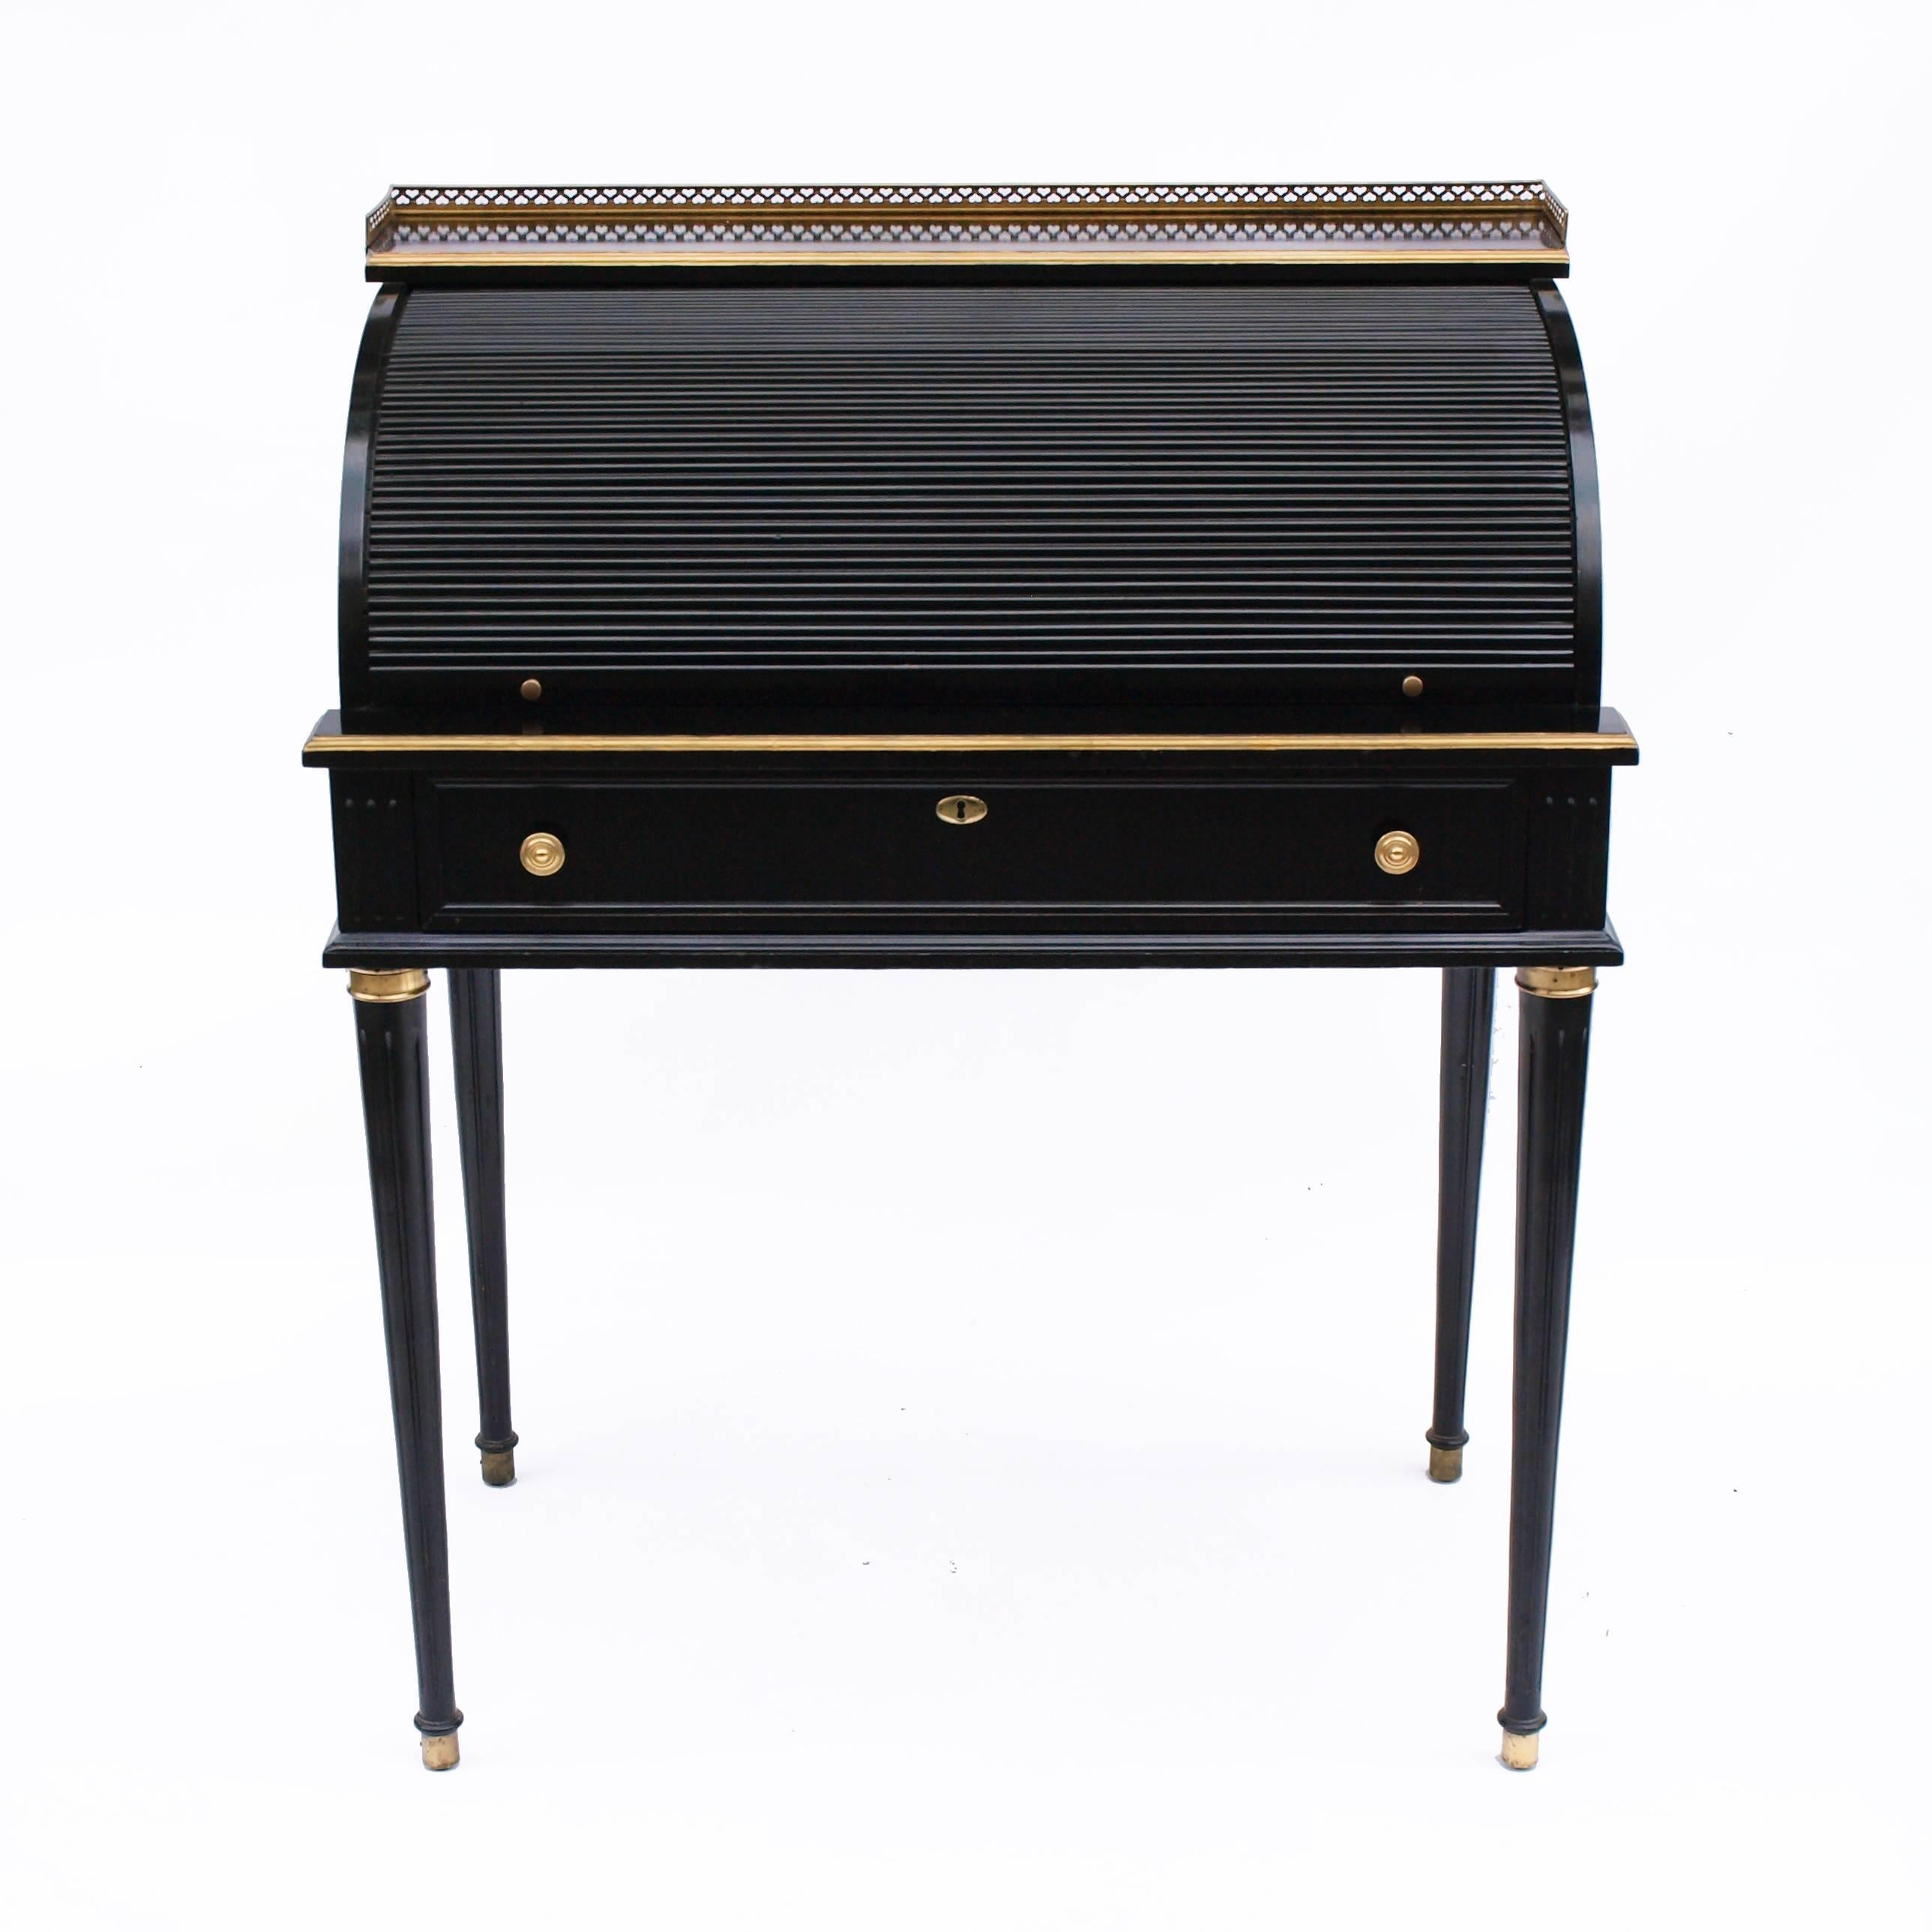 A beautiful Regency style black lacquer roll top desk, with gold gilt embellishments and brass detailing. The desk section slides outwards to create and extended writing area.